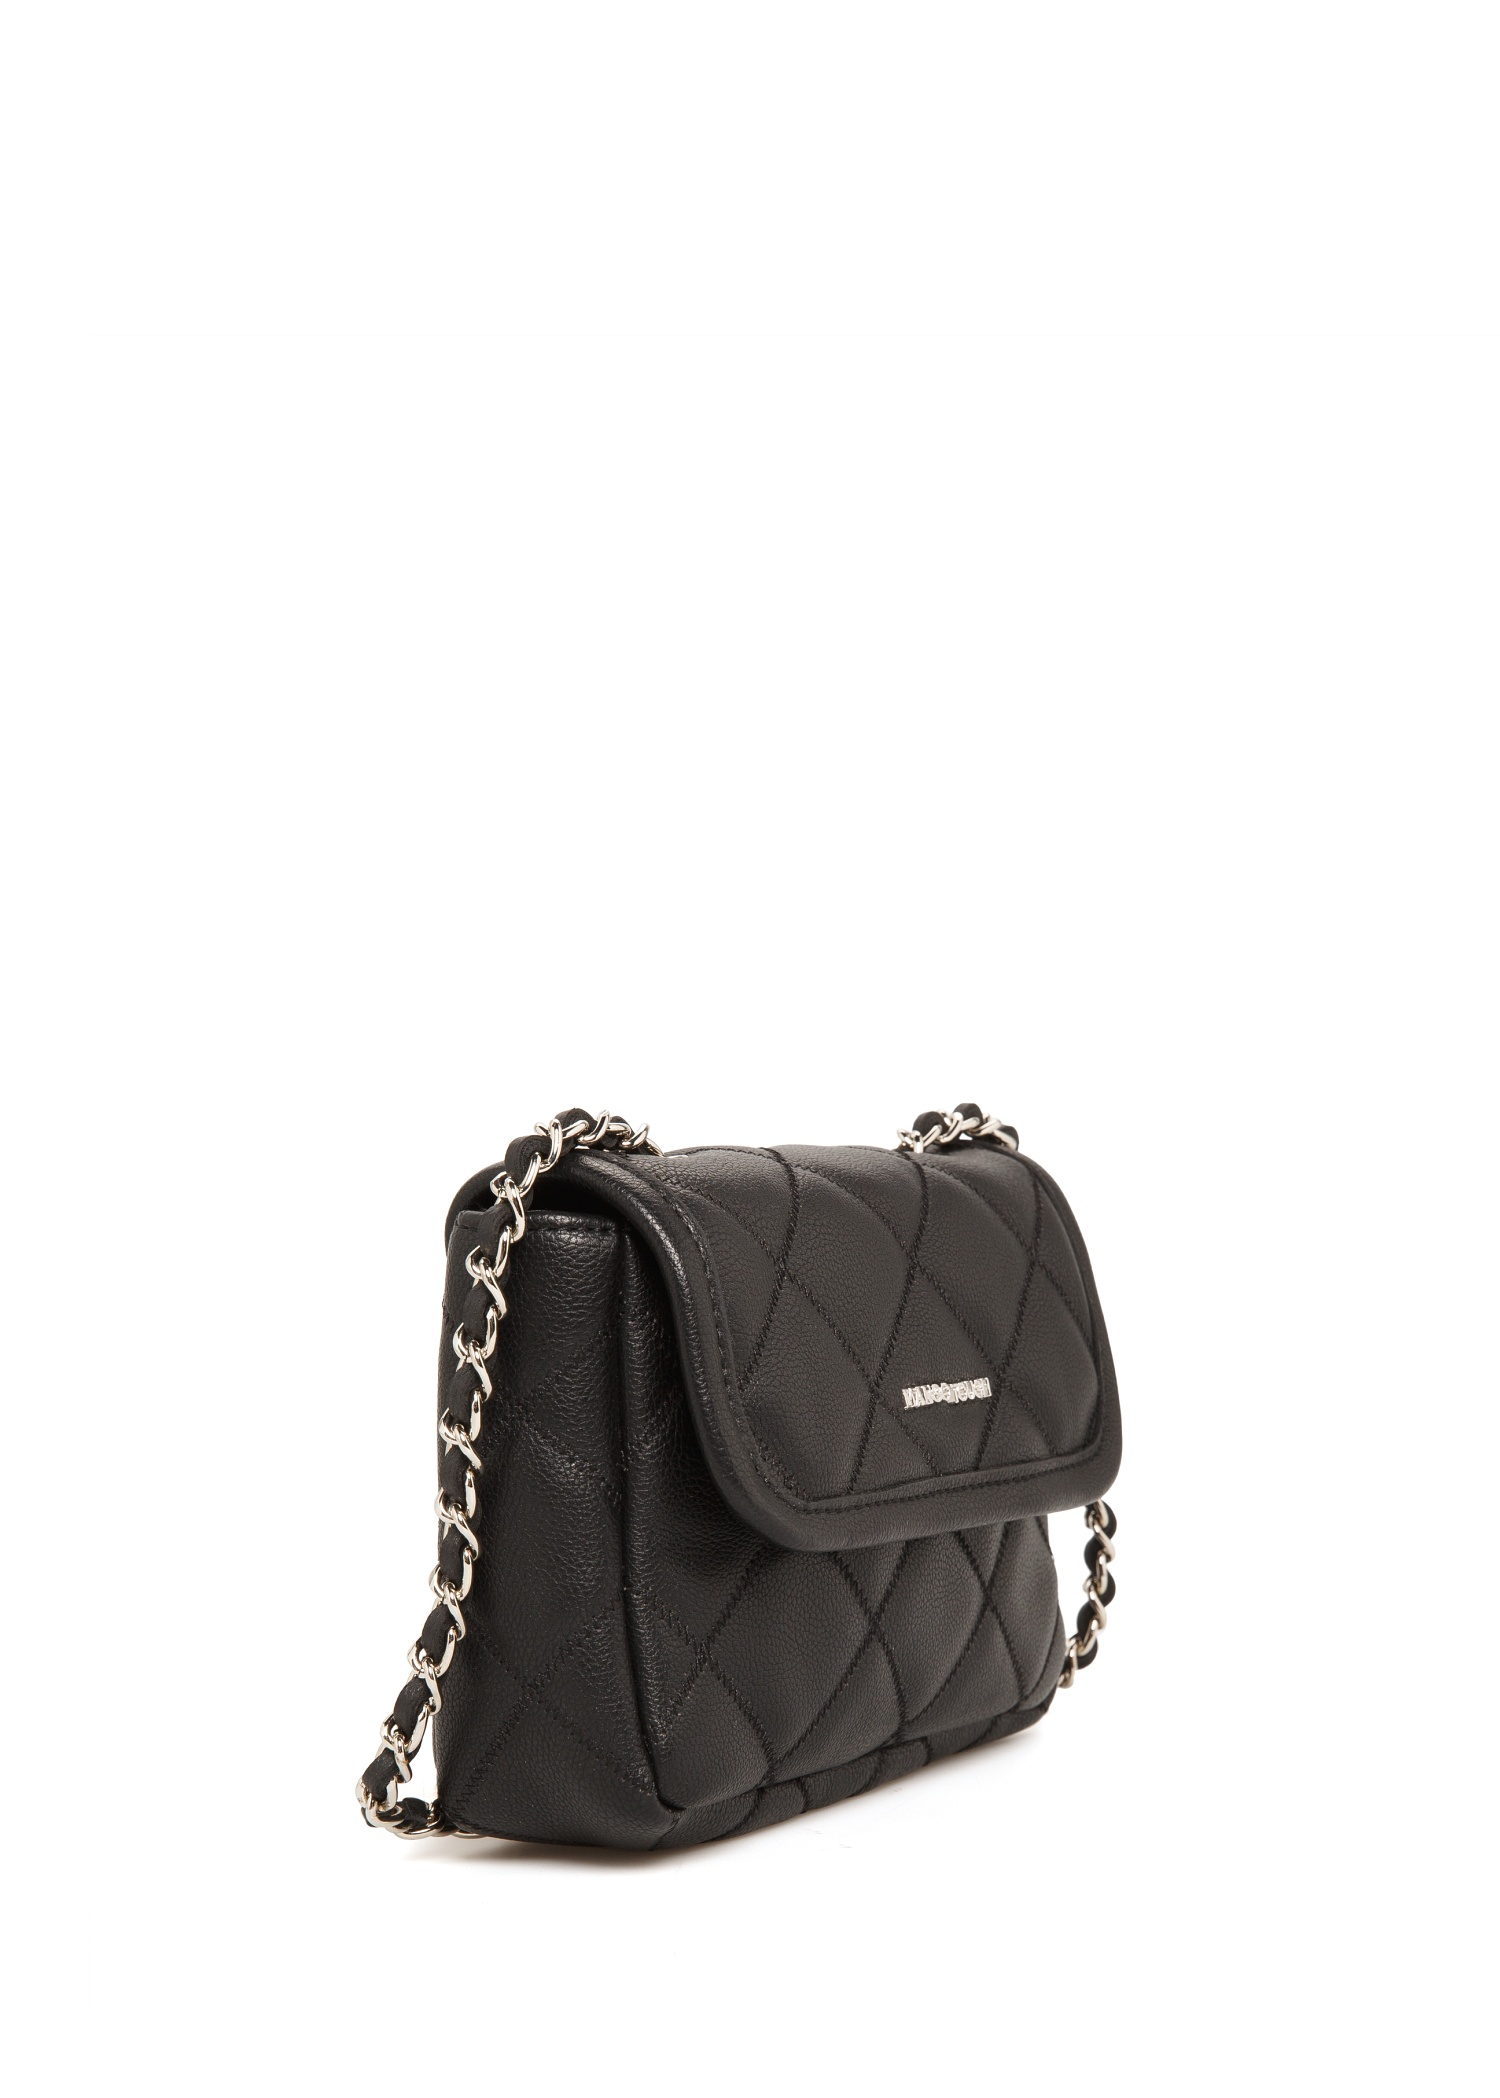 Mango Quilted Mini Cross-Body Bag in Black - Lyst